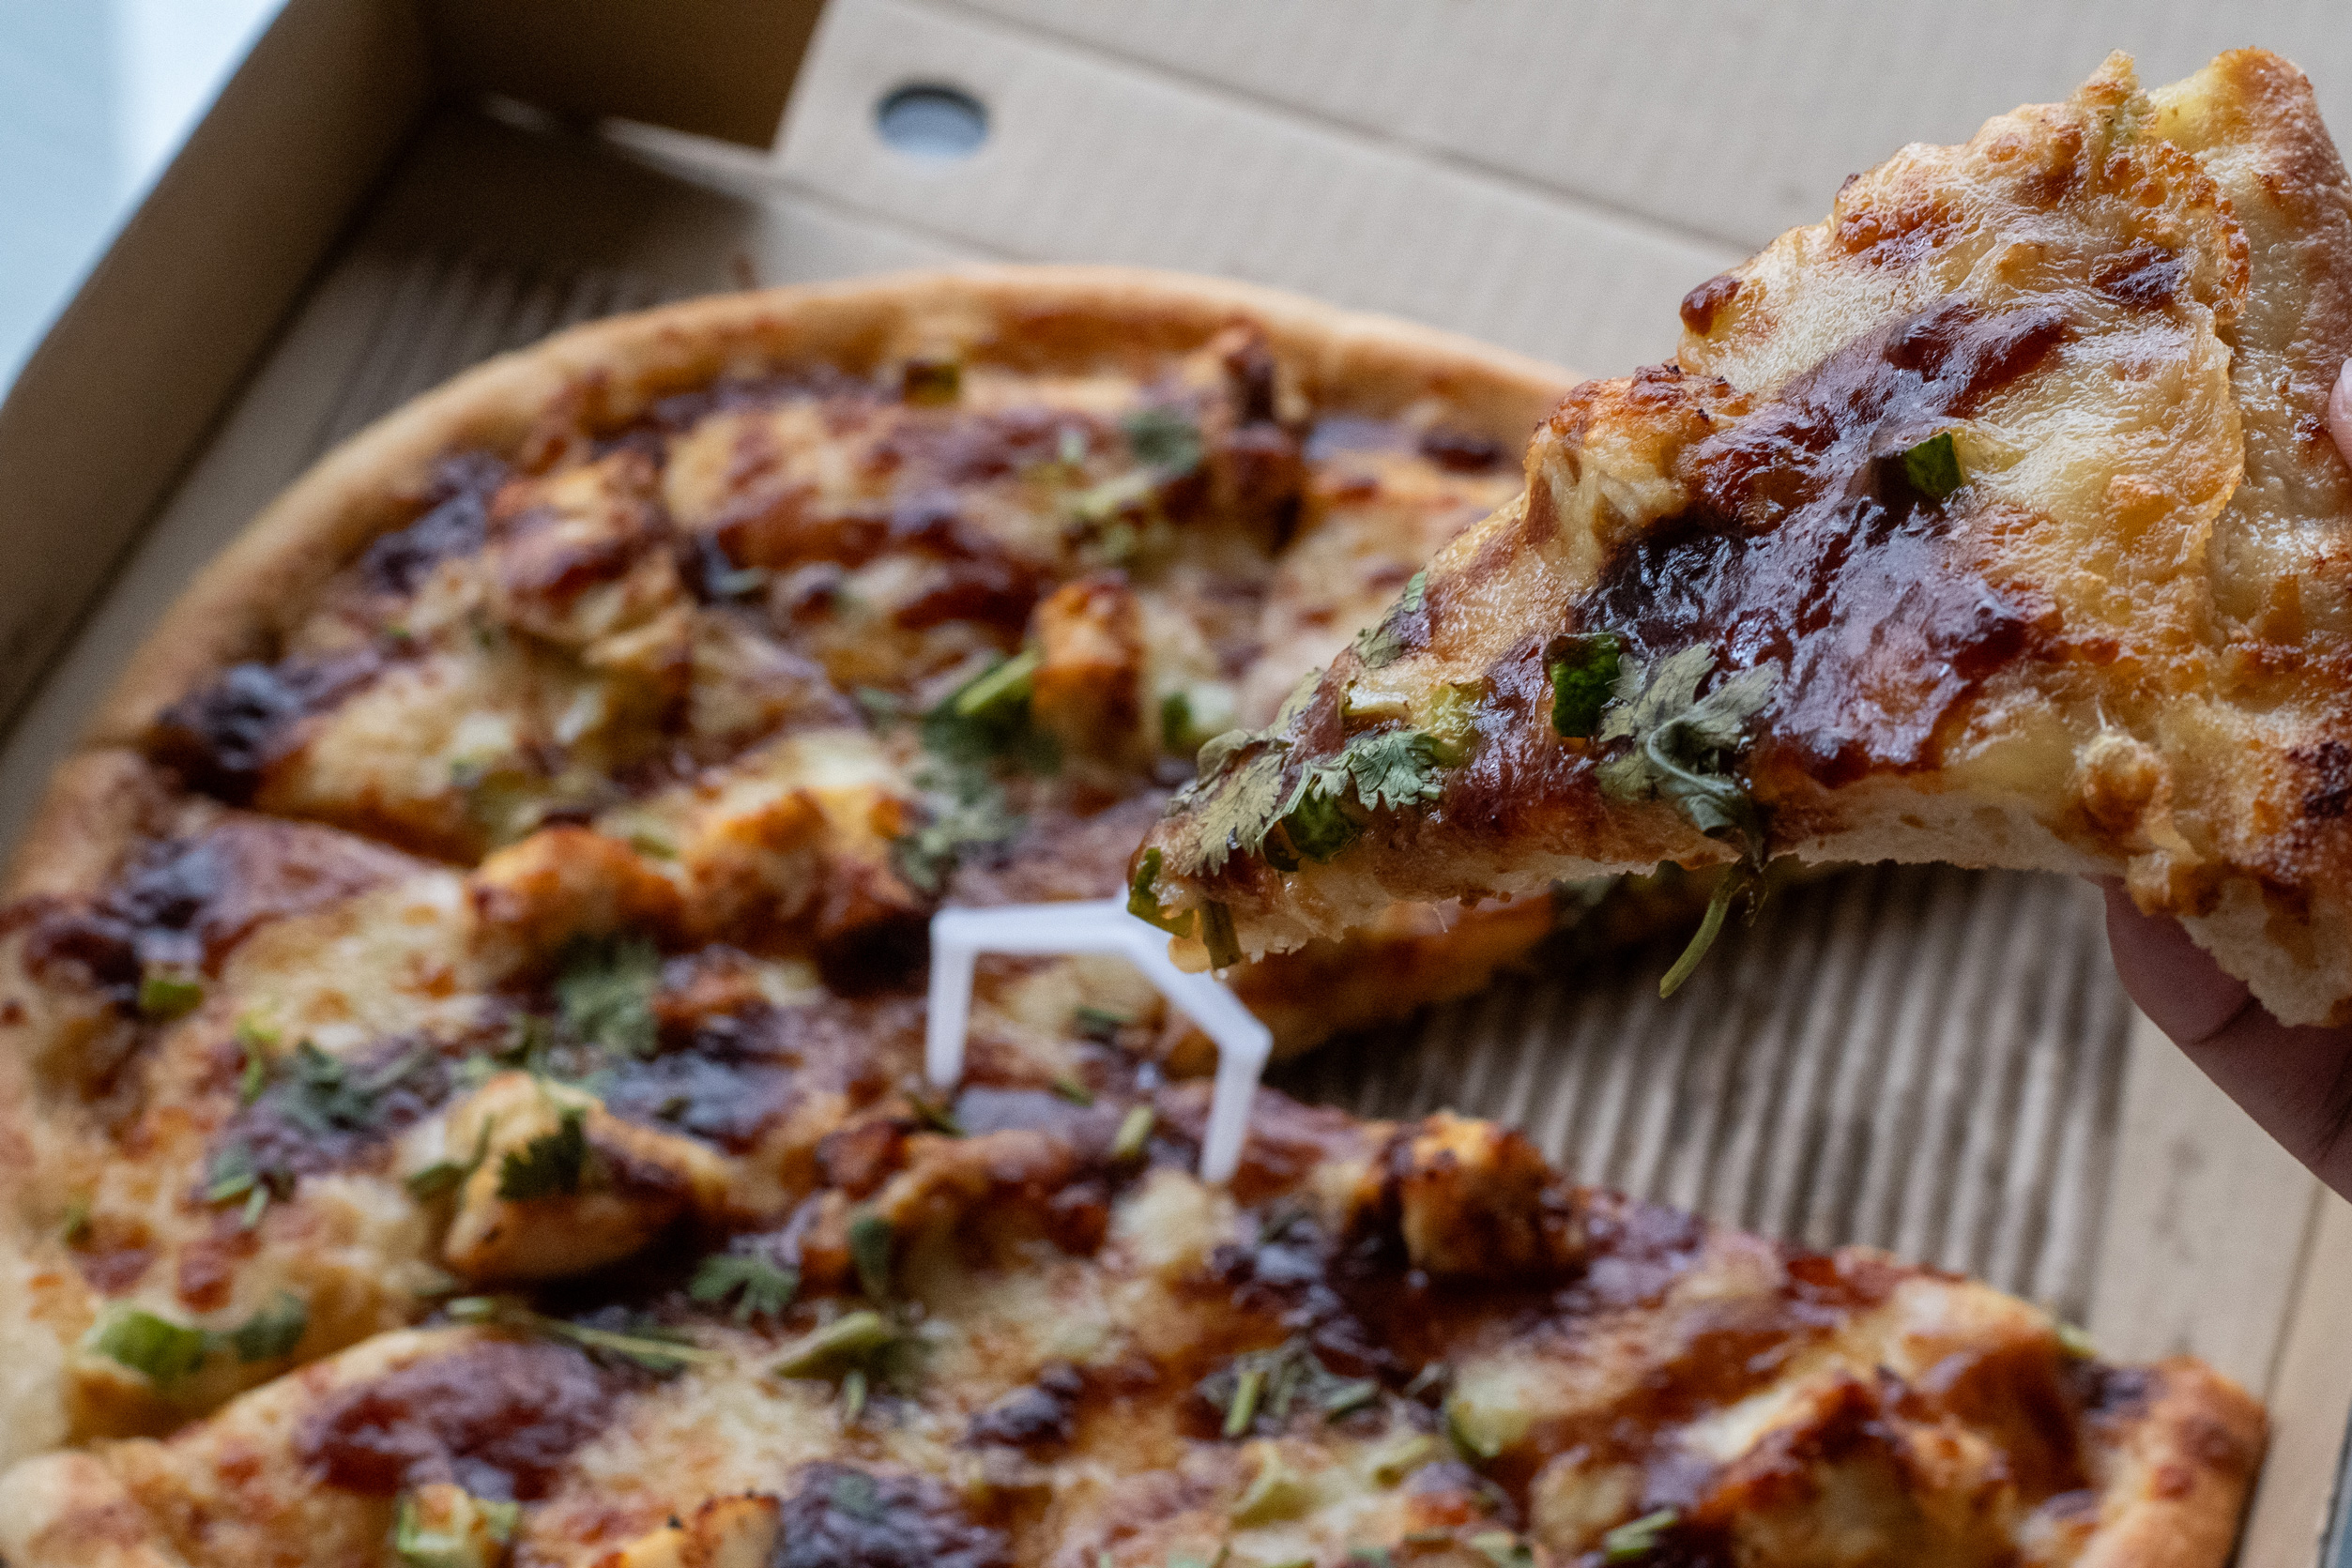 The pizza is topped with marinated chicken, cucumber, sweet sauce, and coriander.